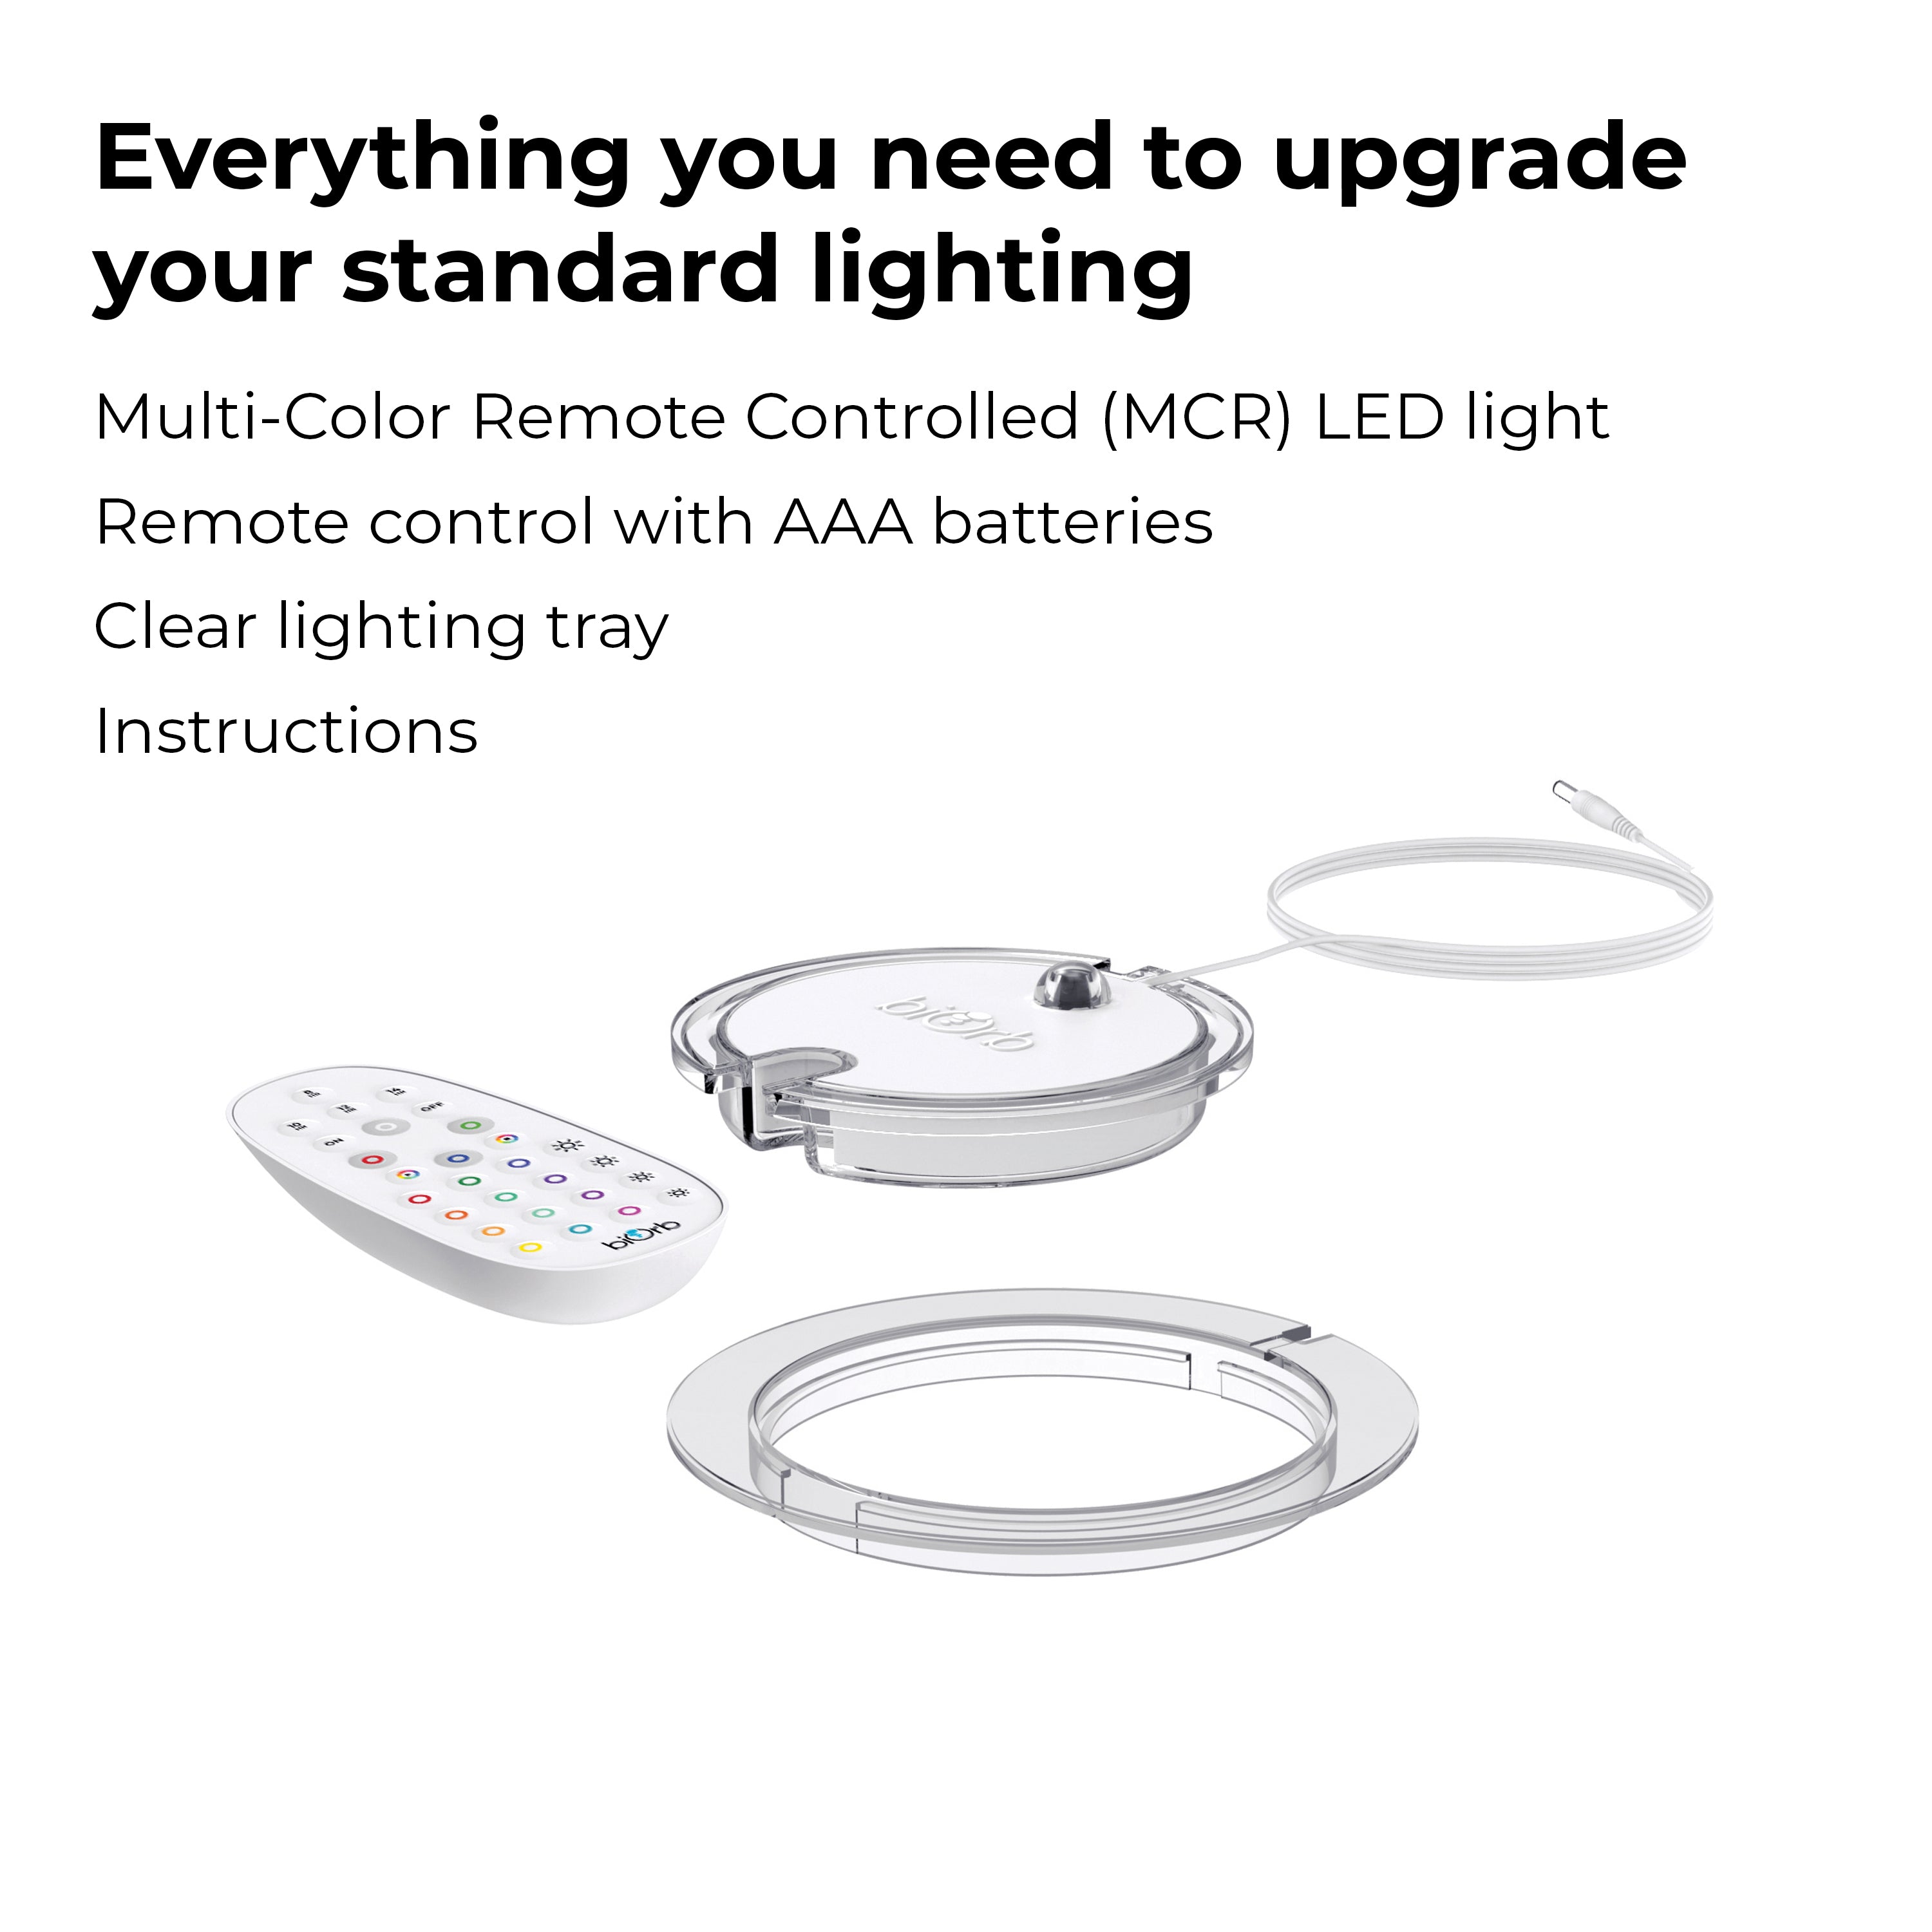 MCR LED Small Light Accessory - Everything you need to upgrade your standard lighting